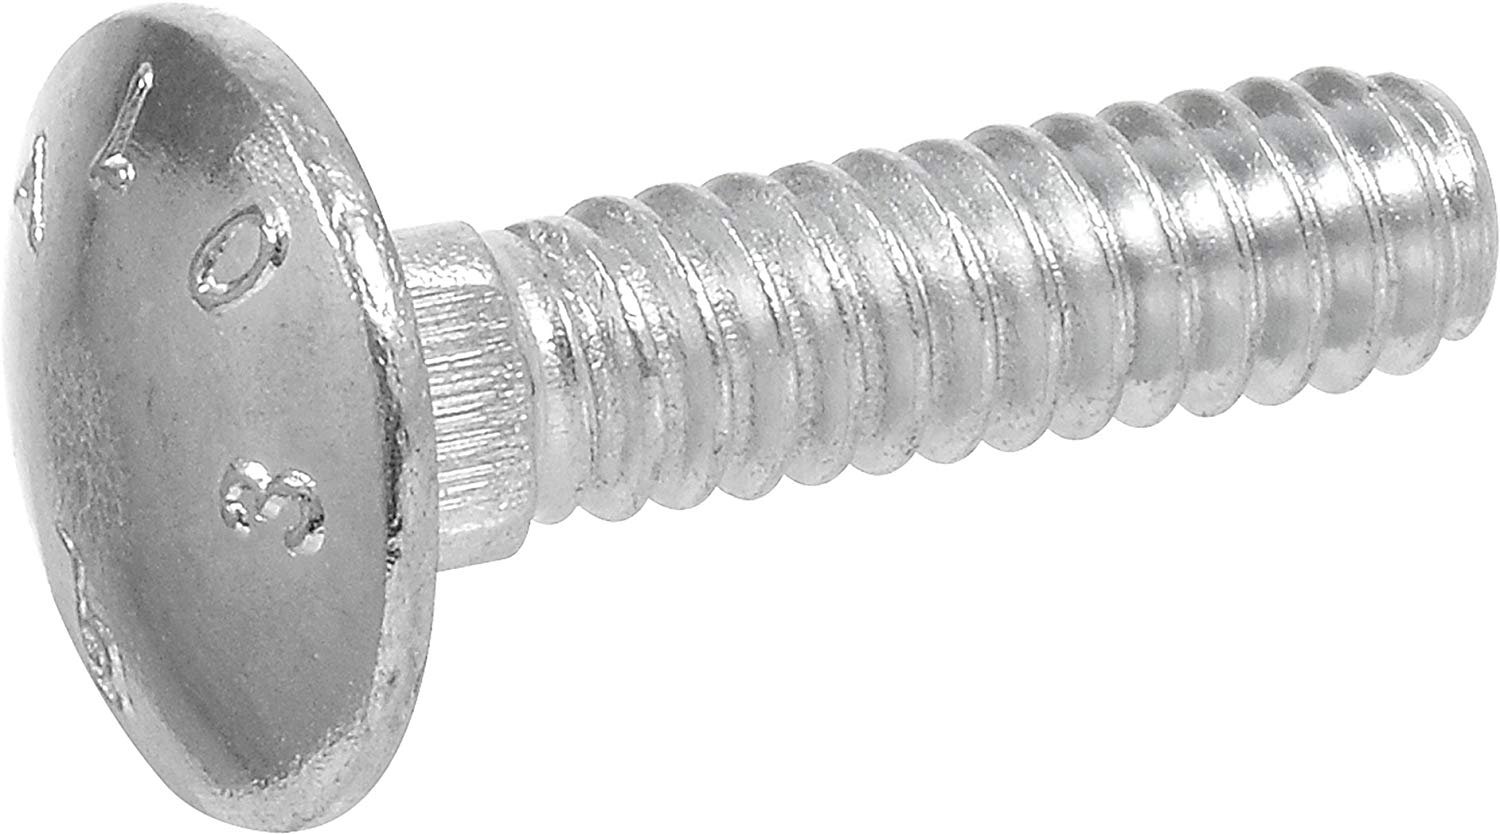 Hillman 240318 Carriage Bolt, 1/2 x 4-Inch, Steel, Zinc-Plated, Silver, 25-Pack - image 1 of 2